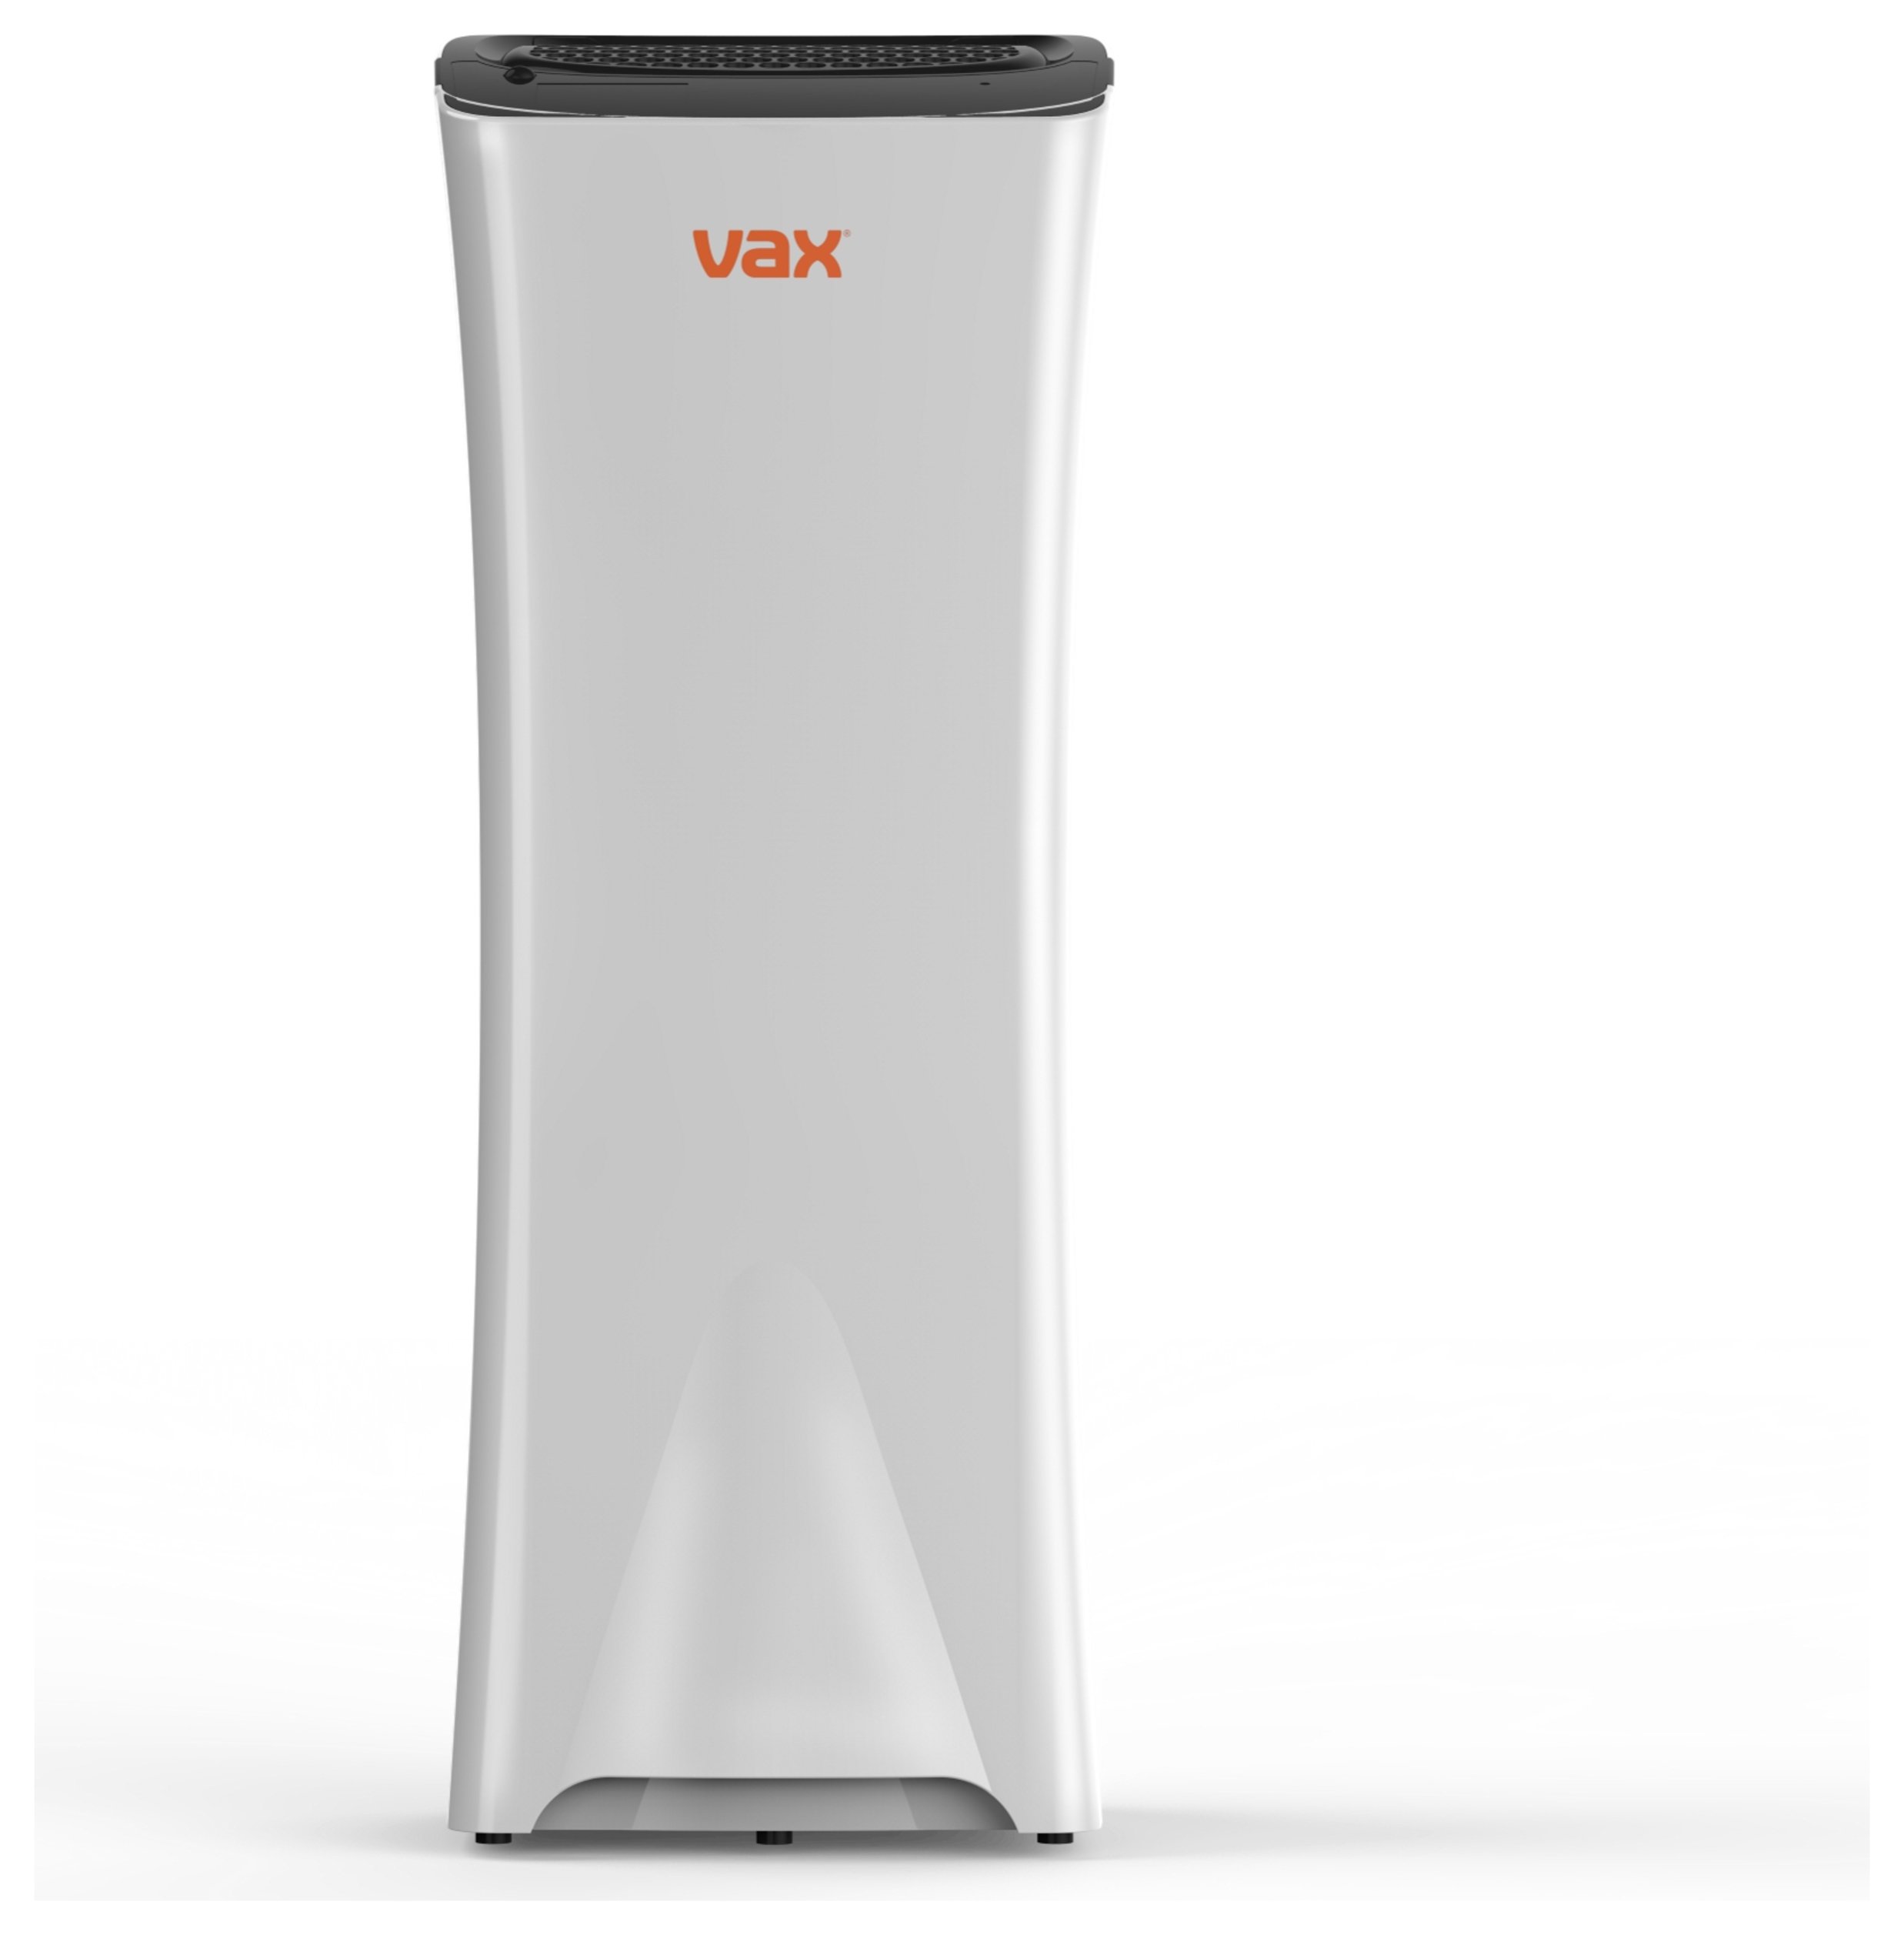 Vax 2 in 1 Air Purifier and Humidifier